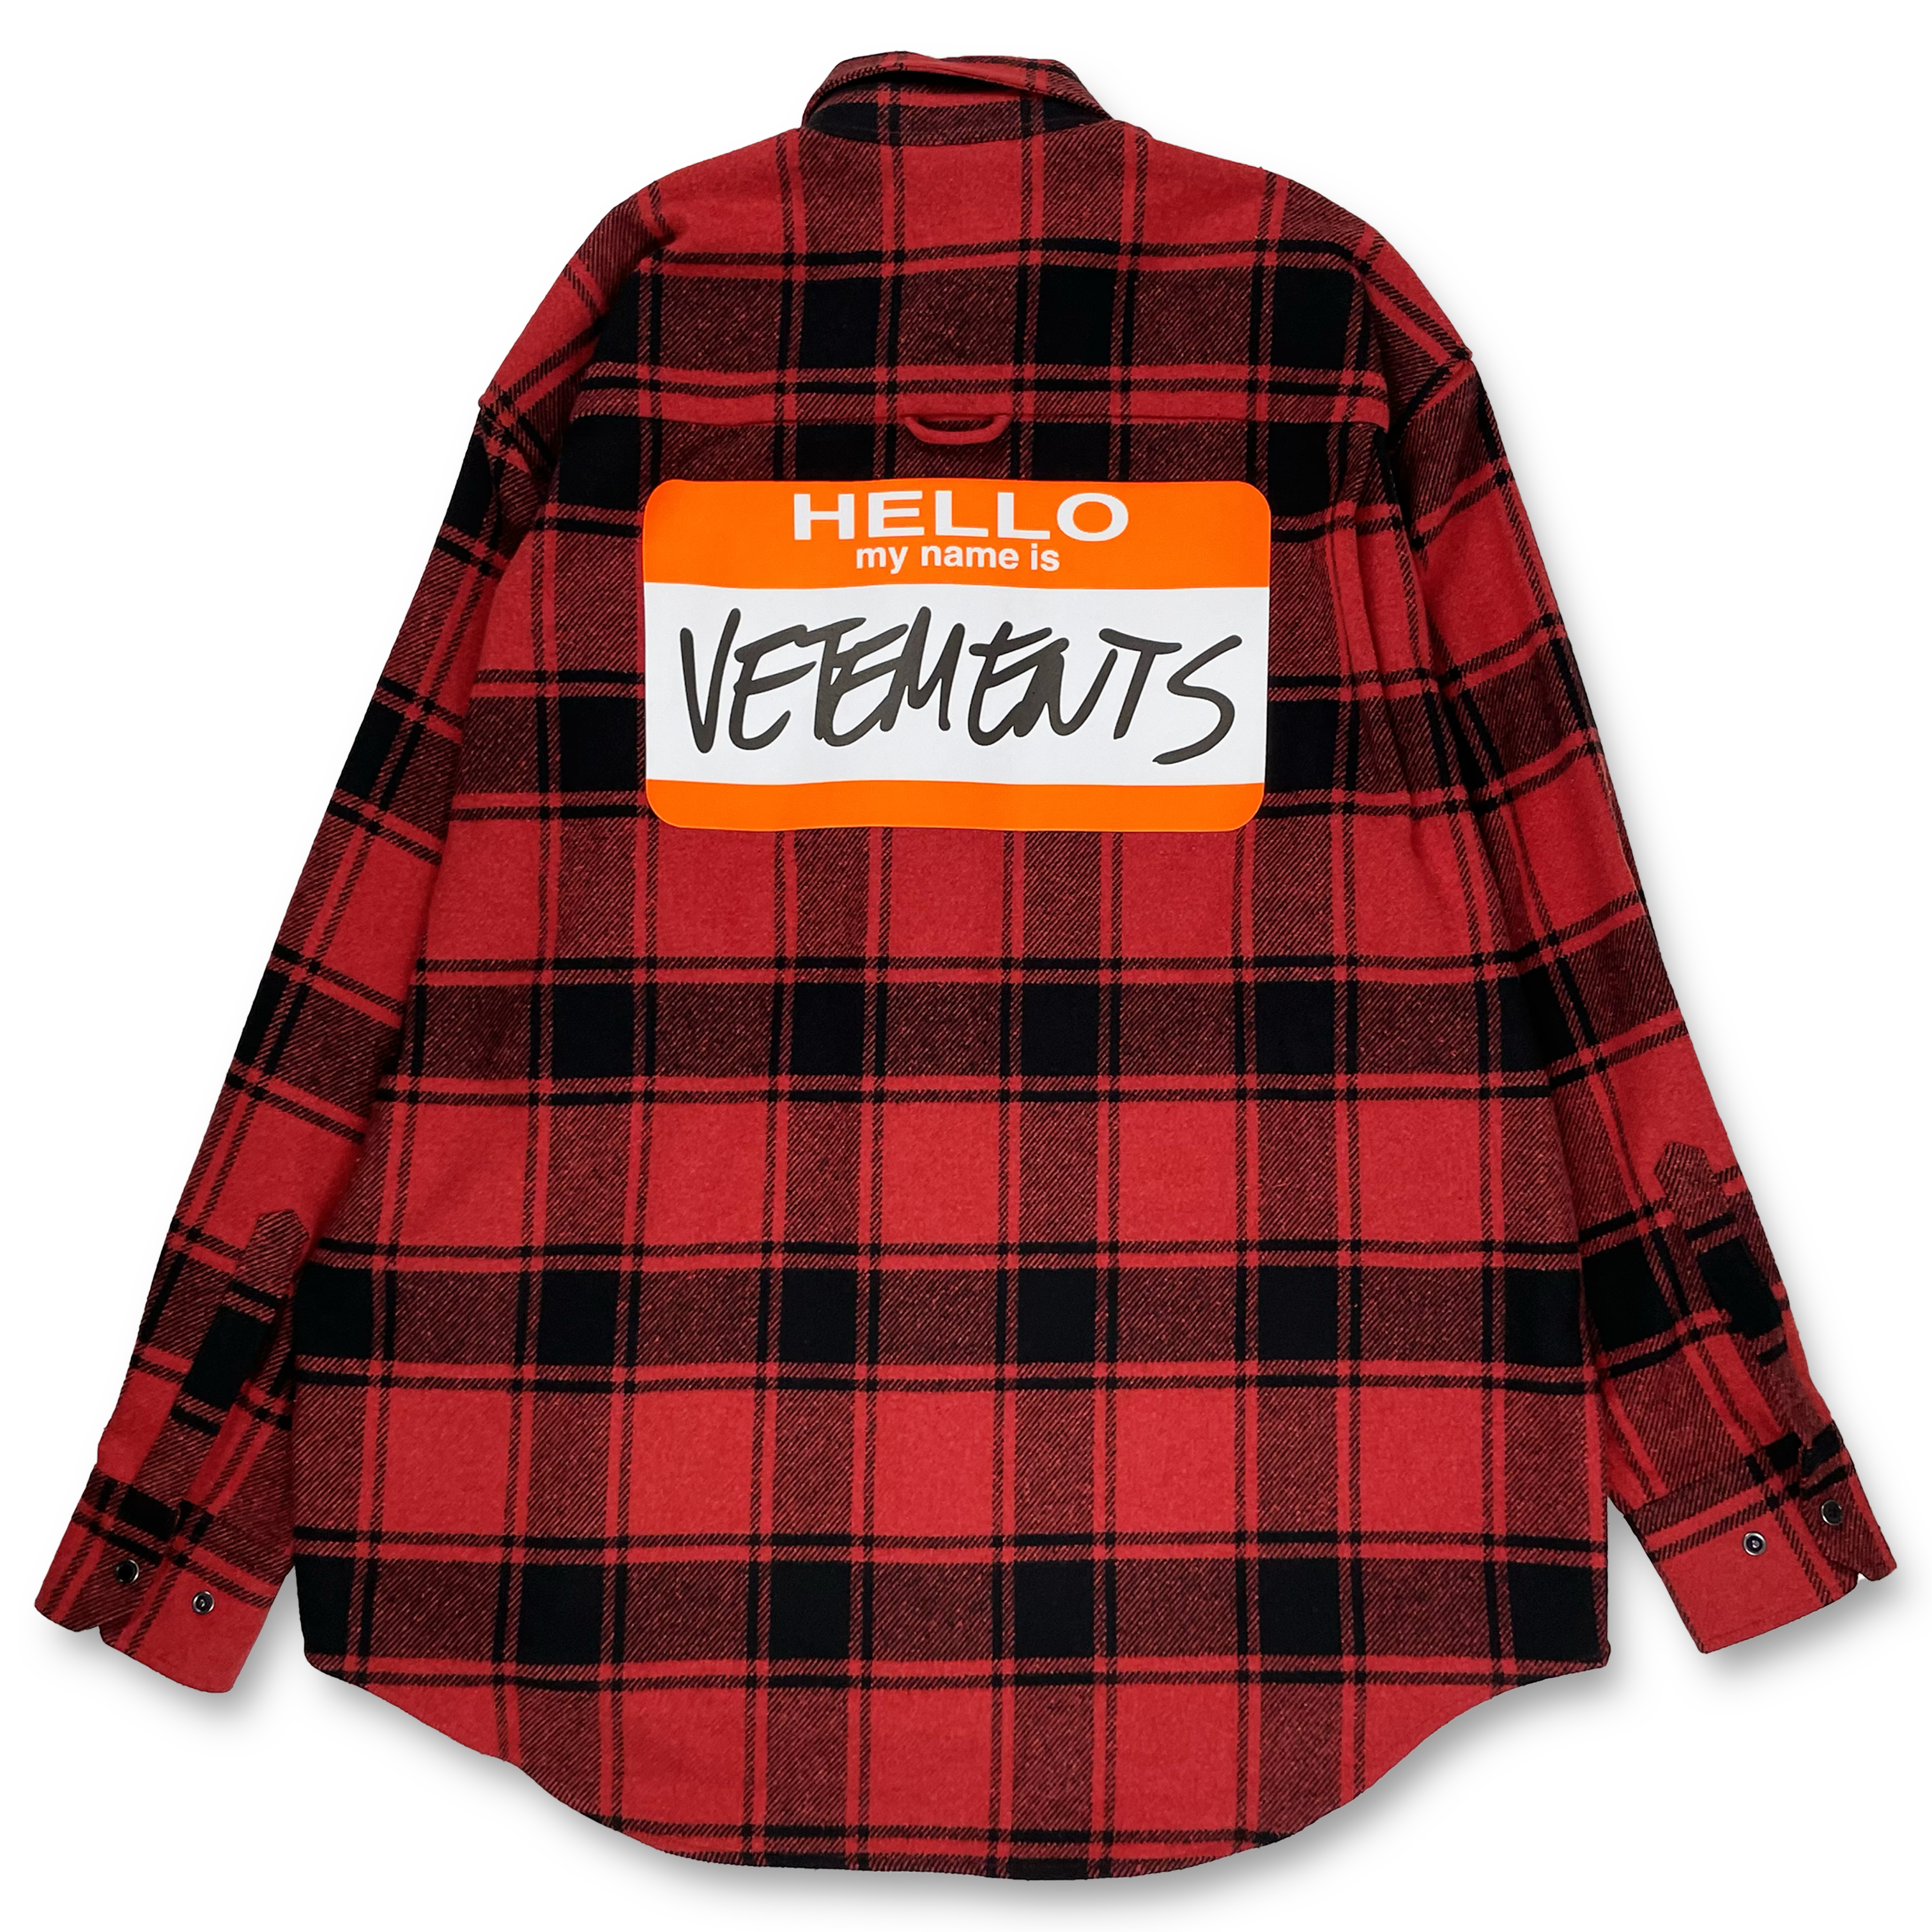 【VETEMENTS】MY NAME IS VETEMENTS FLANNEL SHIRT